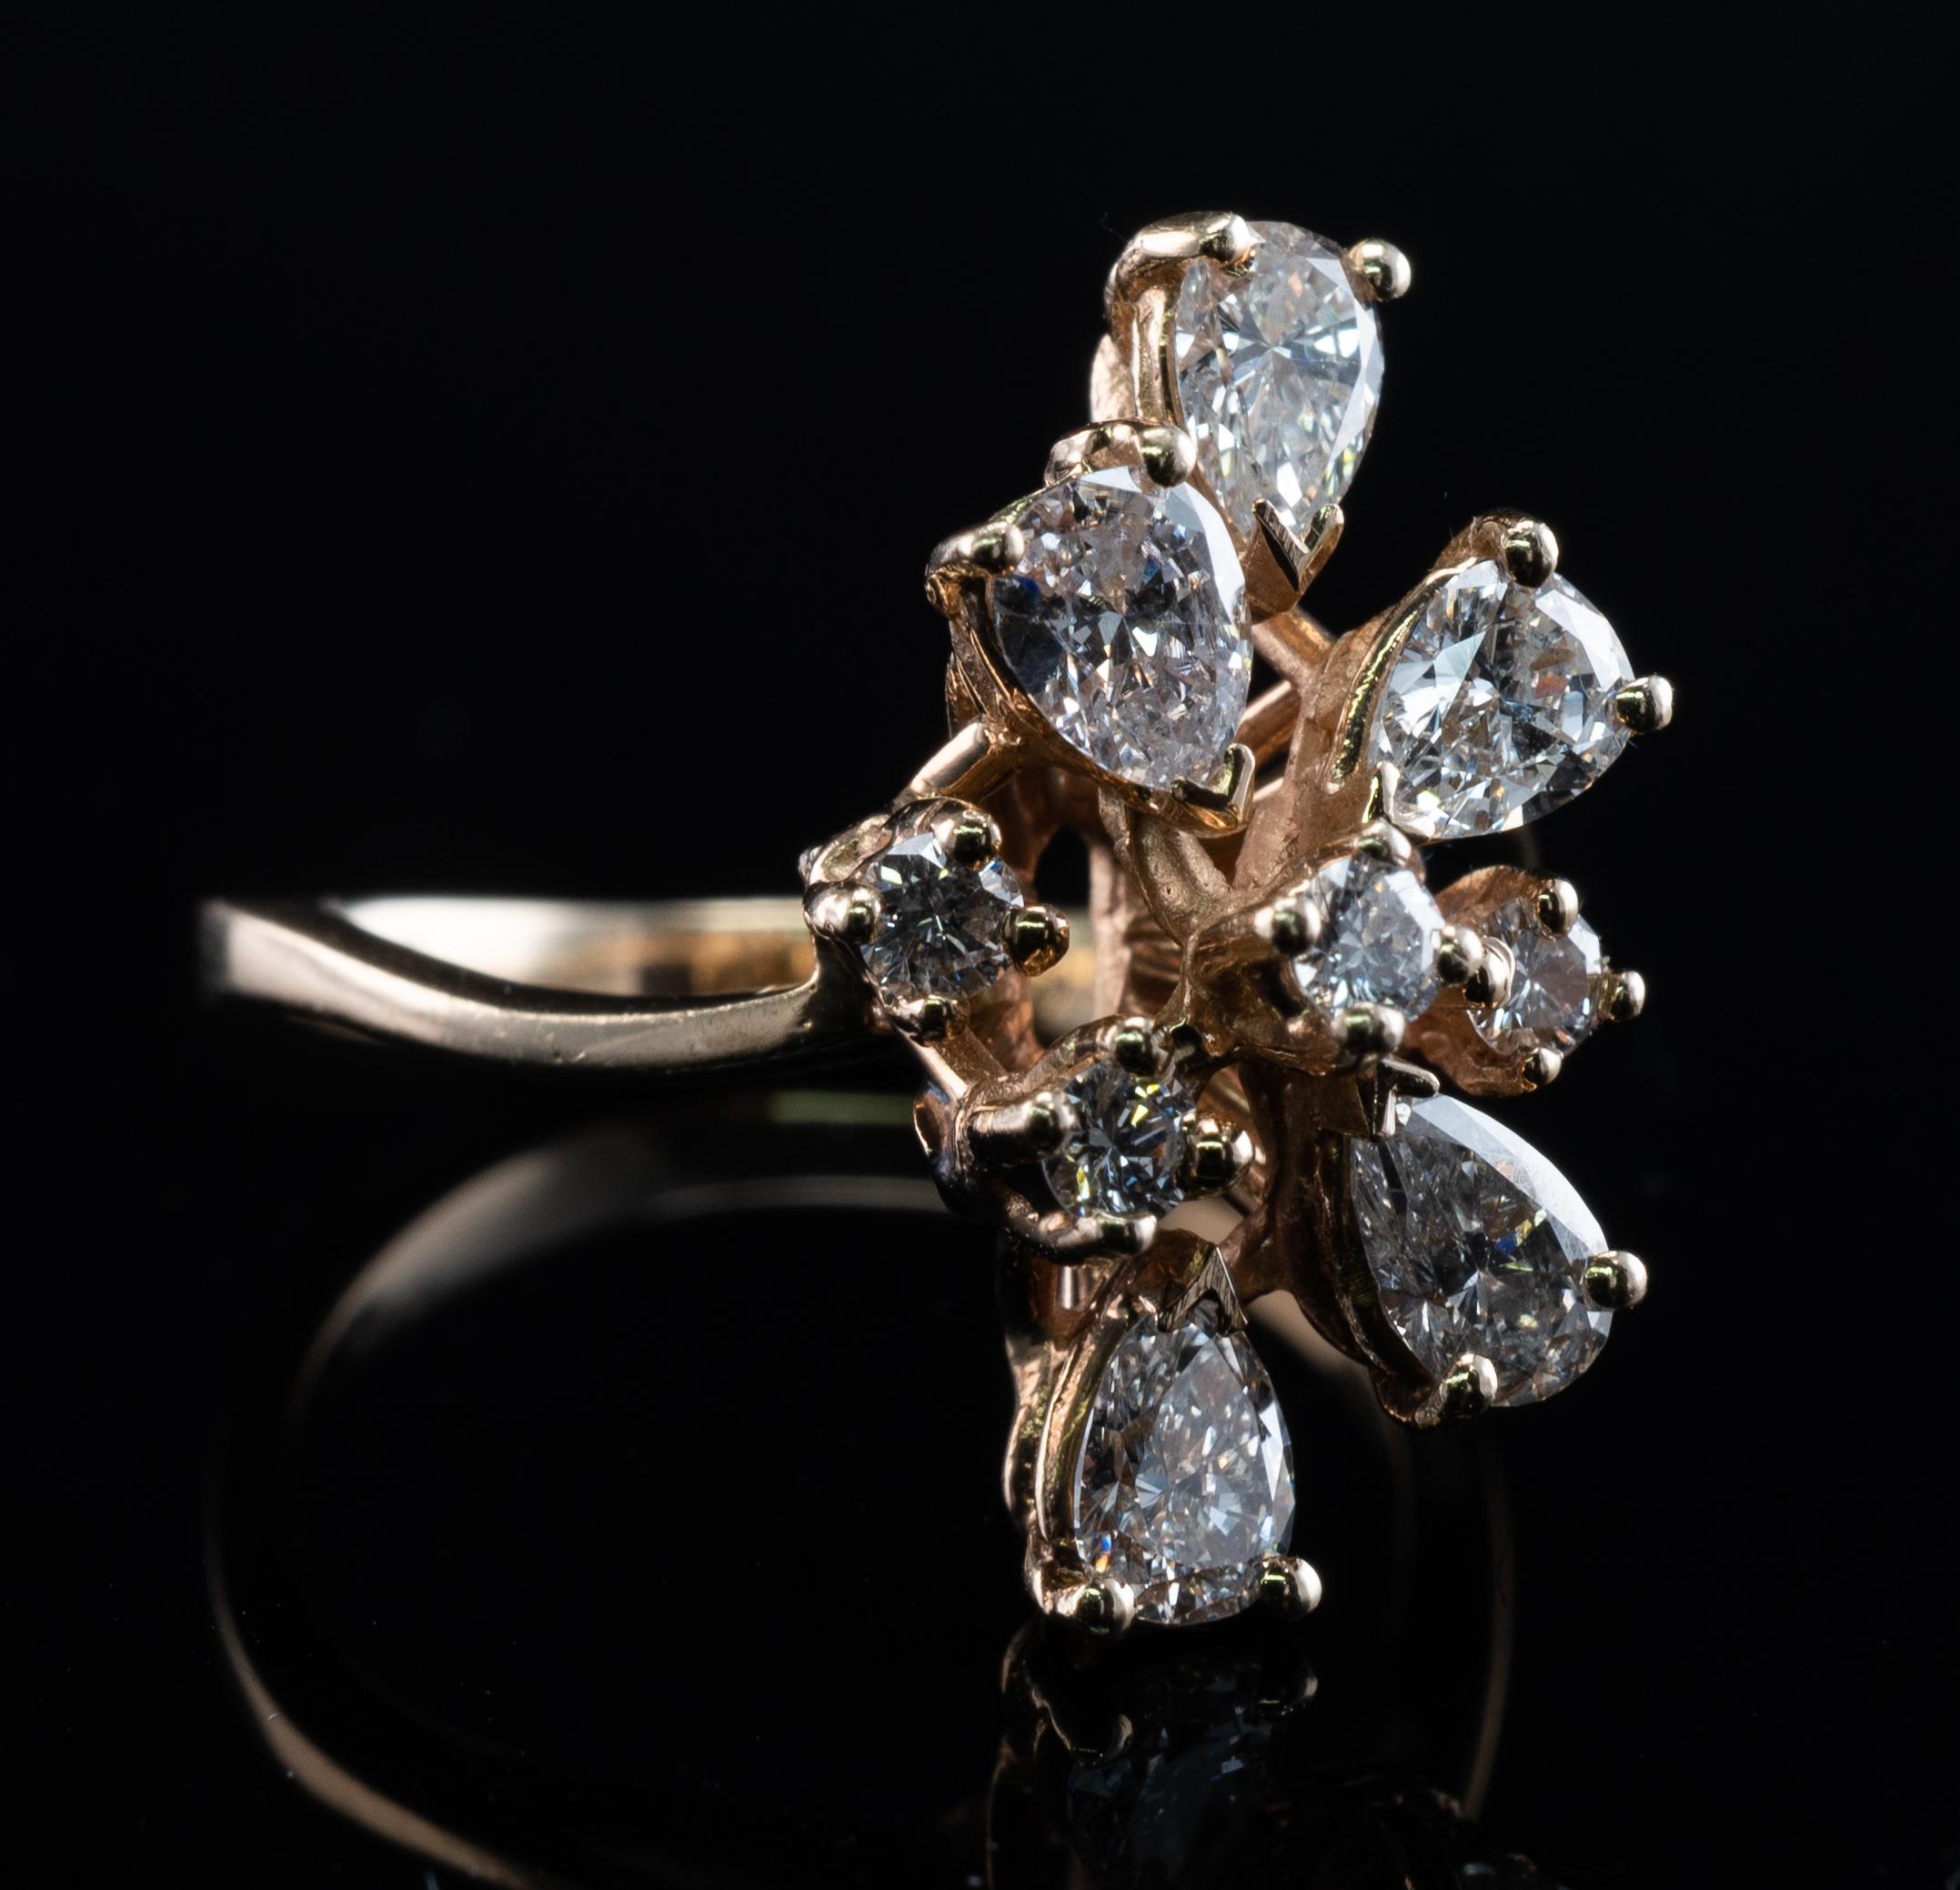 This estate ring is made in solid 14K Yellow Gold.
It is set with 5 pear cut and 4 round diamonds.
The pear cut diamonds total 1.25 carat and round diamonds are .28ct.
The total diamond weight for the ring is 1.53 carat.
The diamonds range from